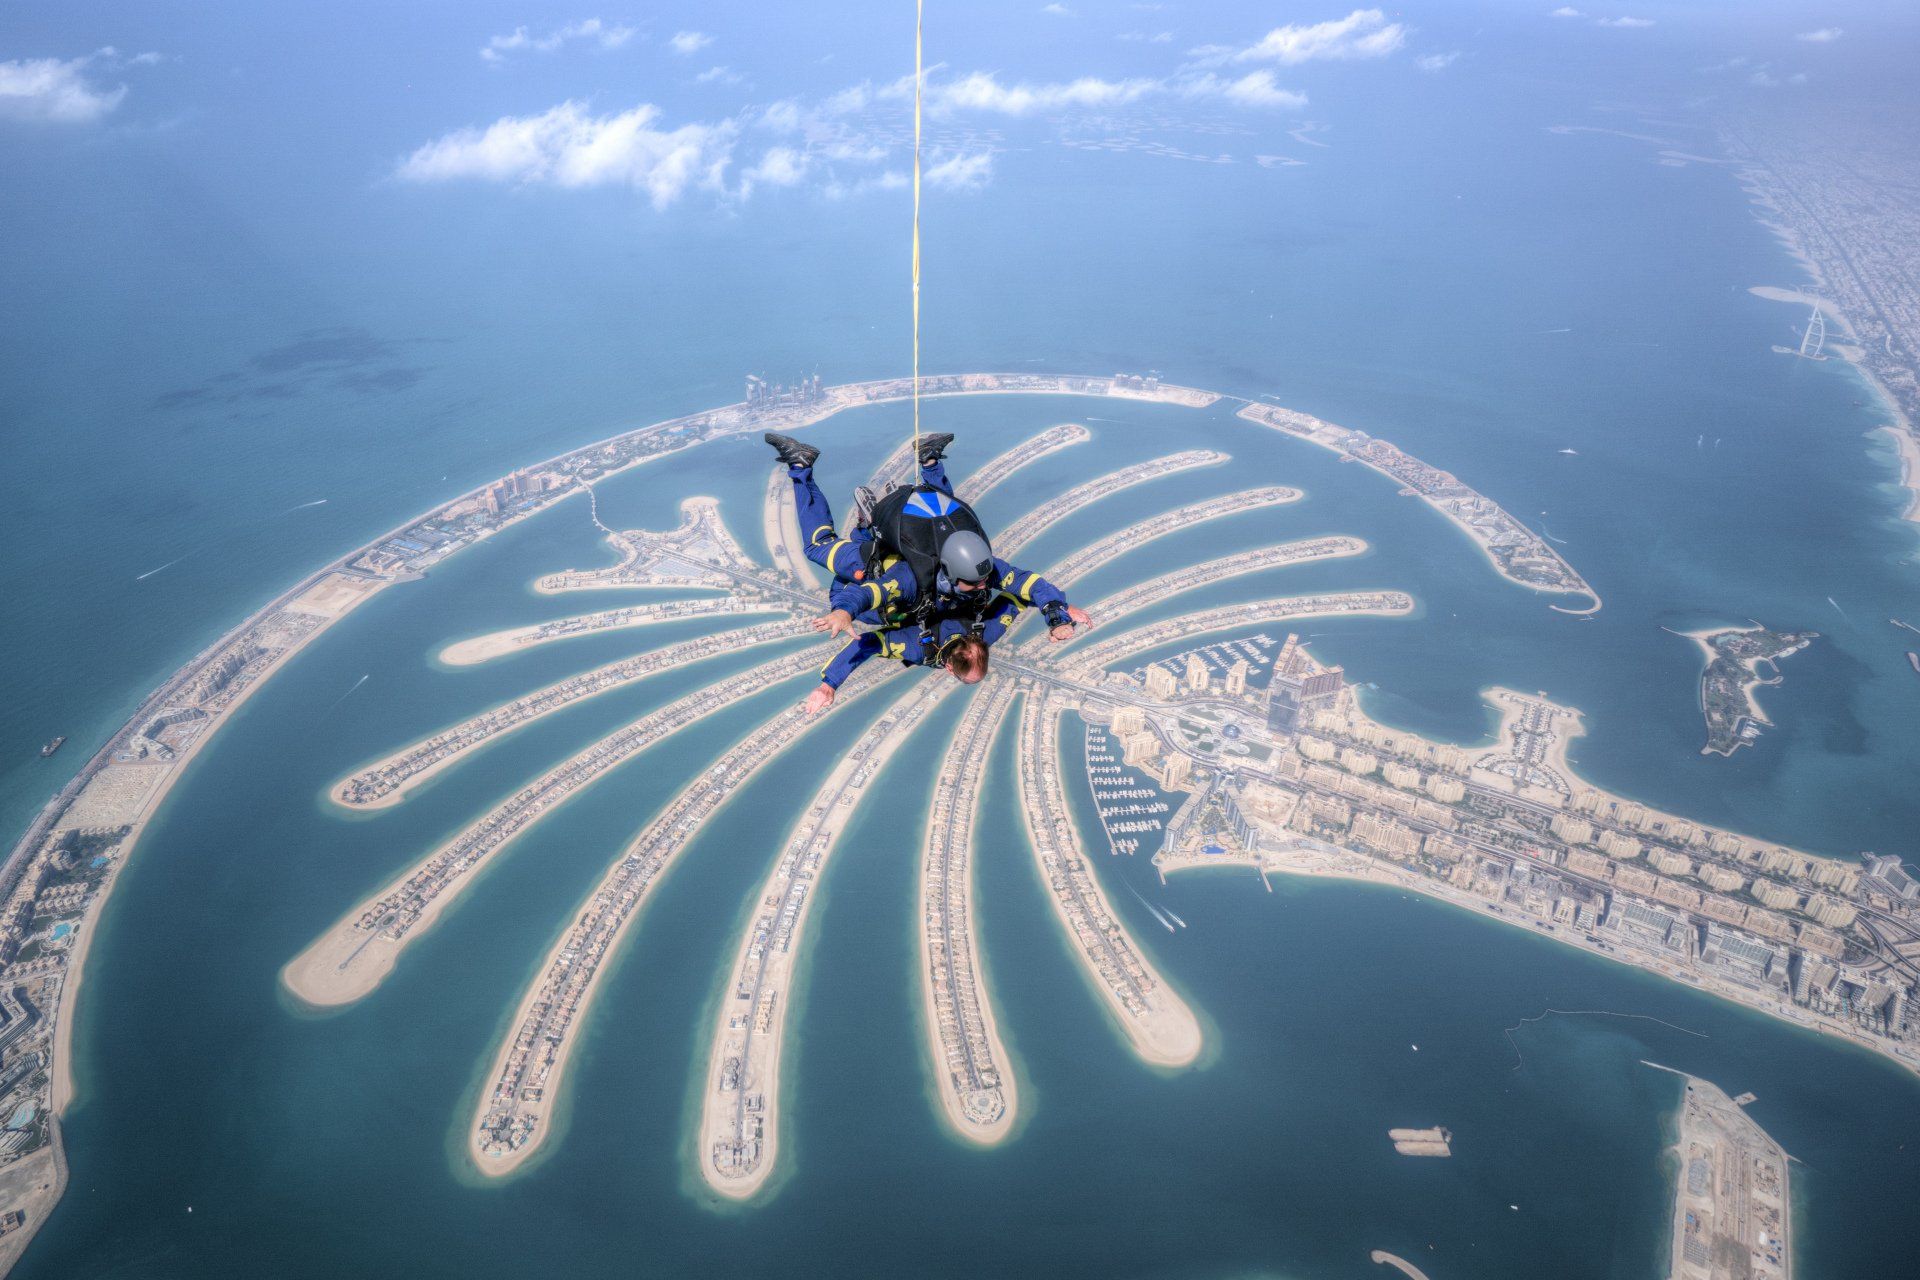 Fastest time to tandem skydive all seven continents: James C. Wigginton and Thomas J. Noonan lll set world record / Dubai